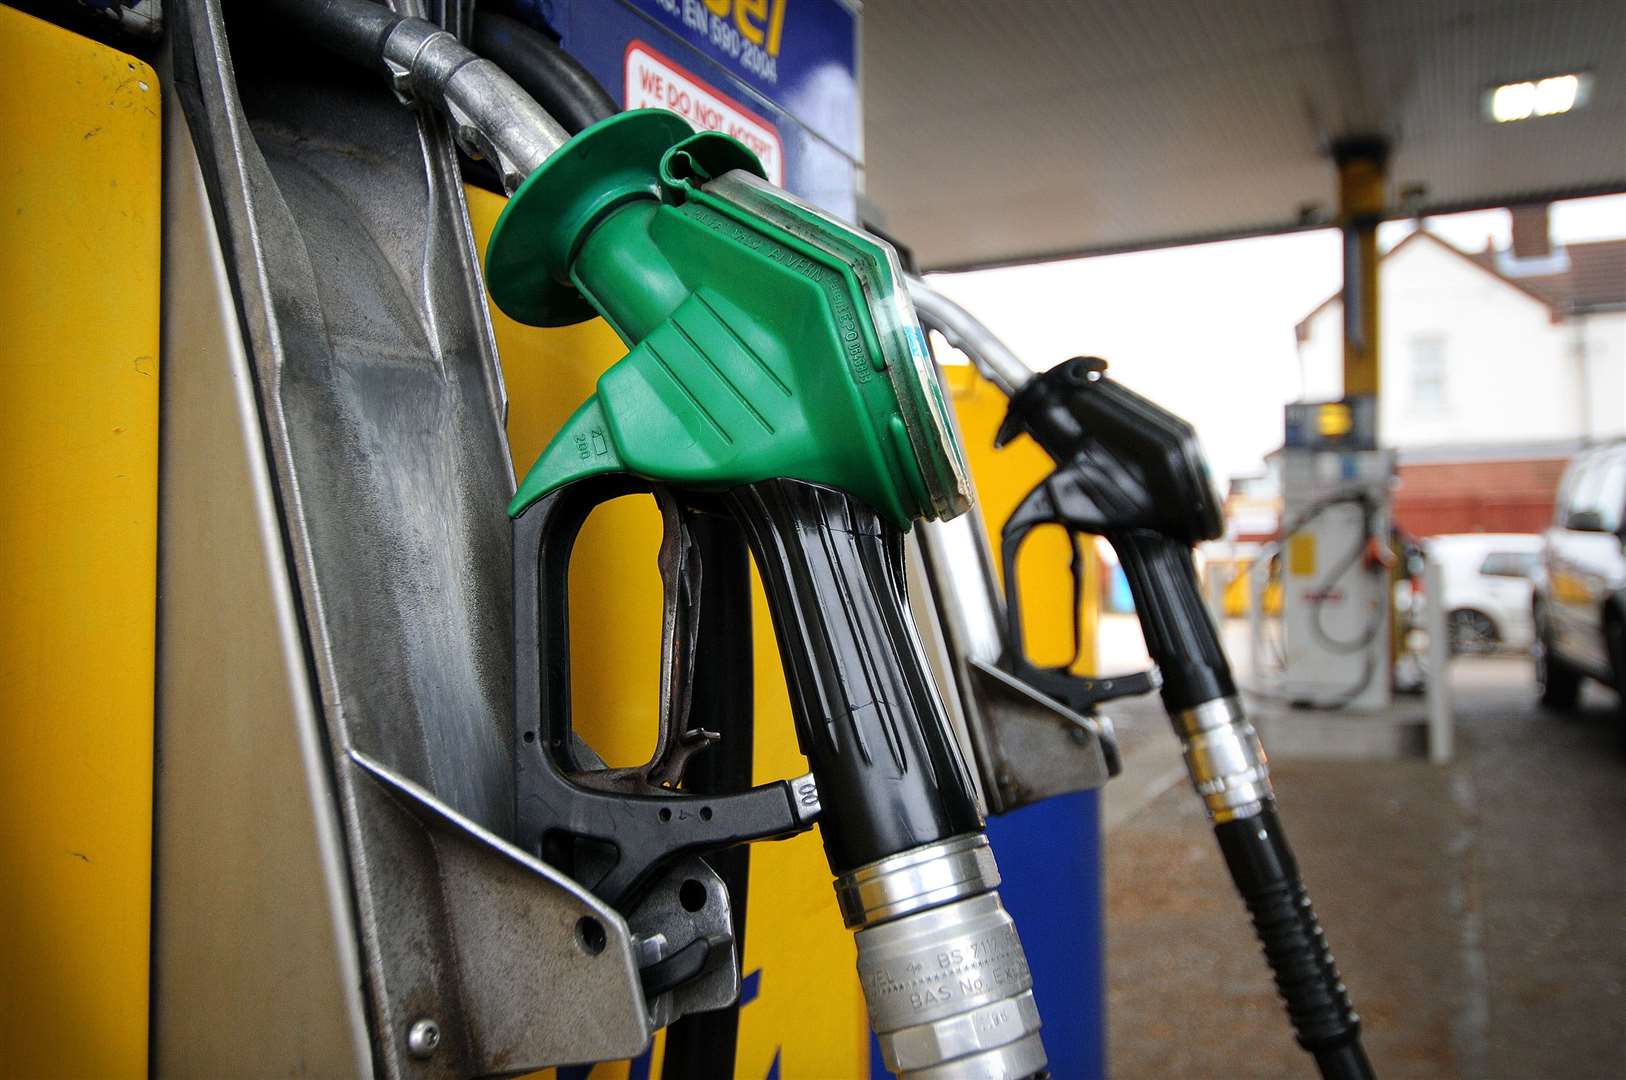 Petrol prices are hitting record highs